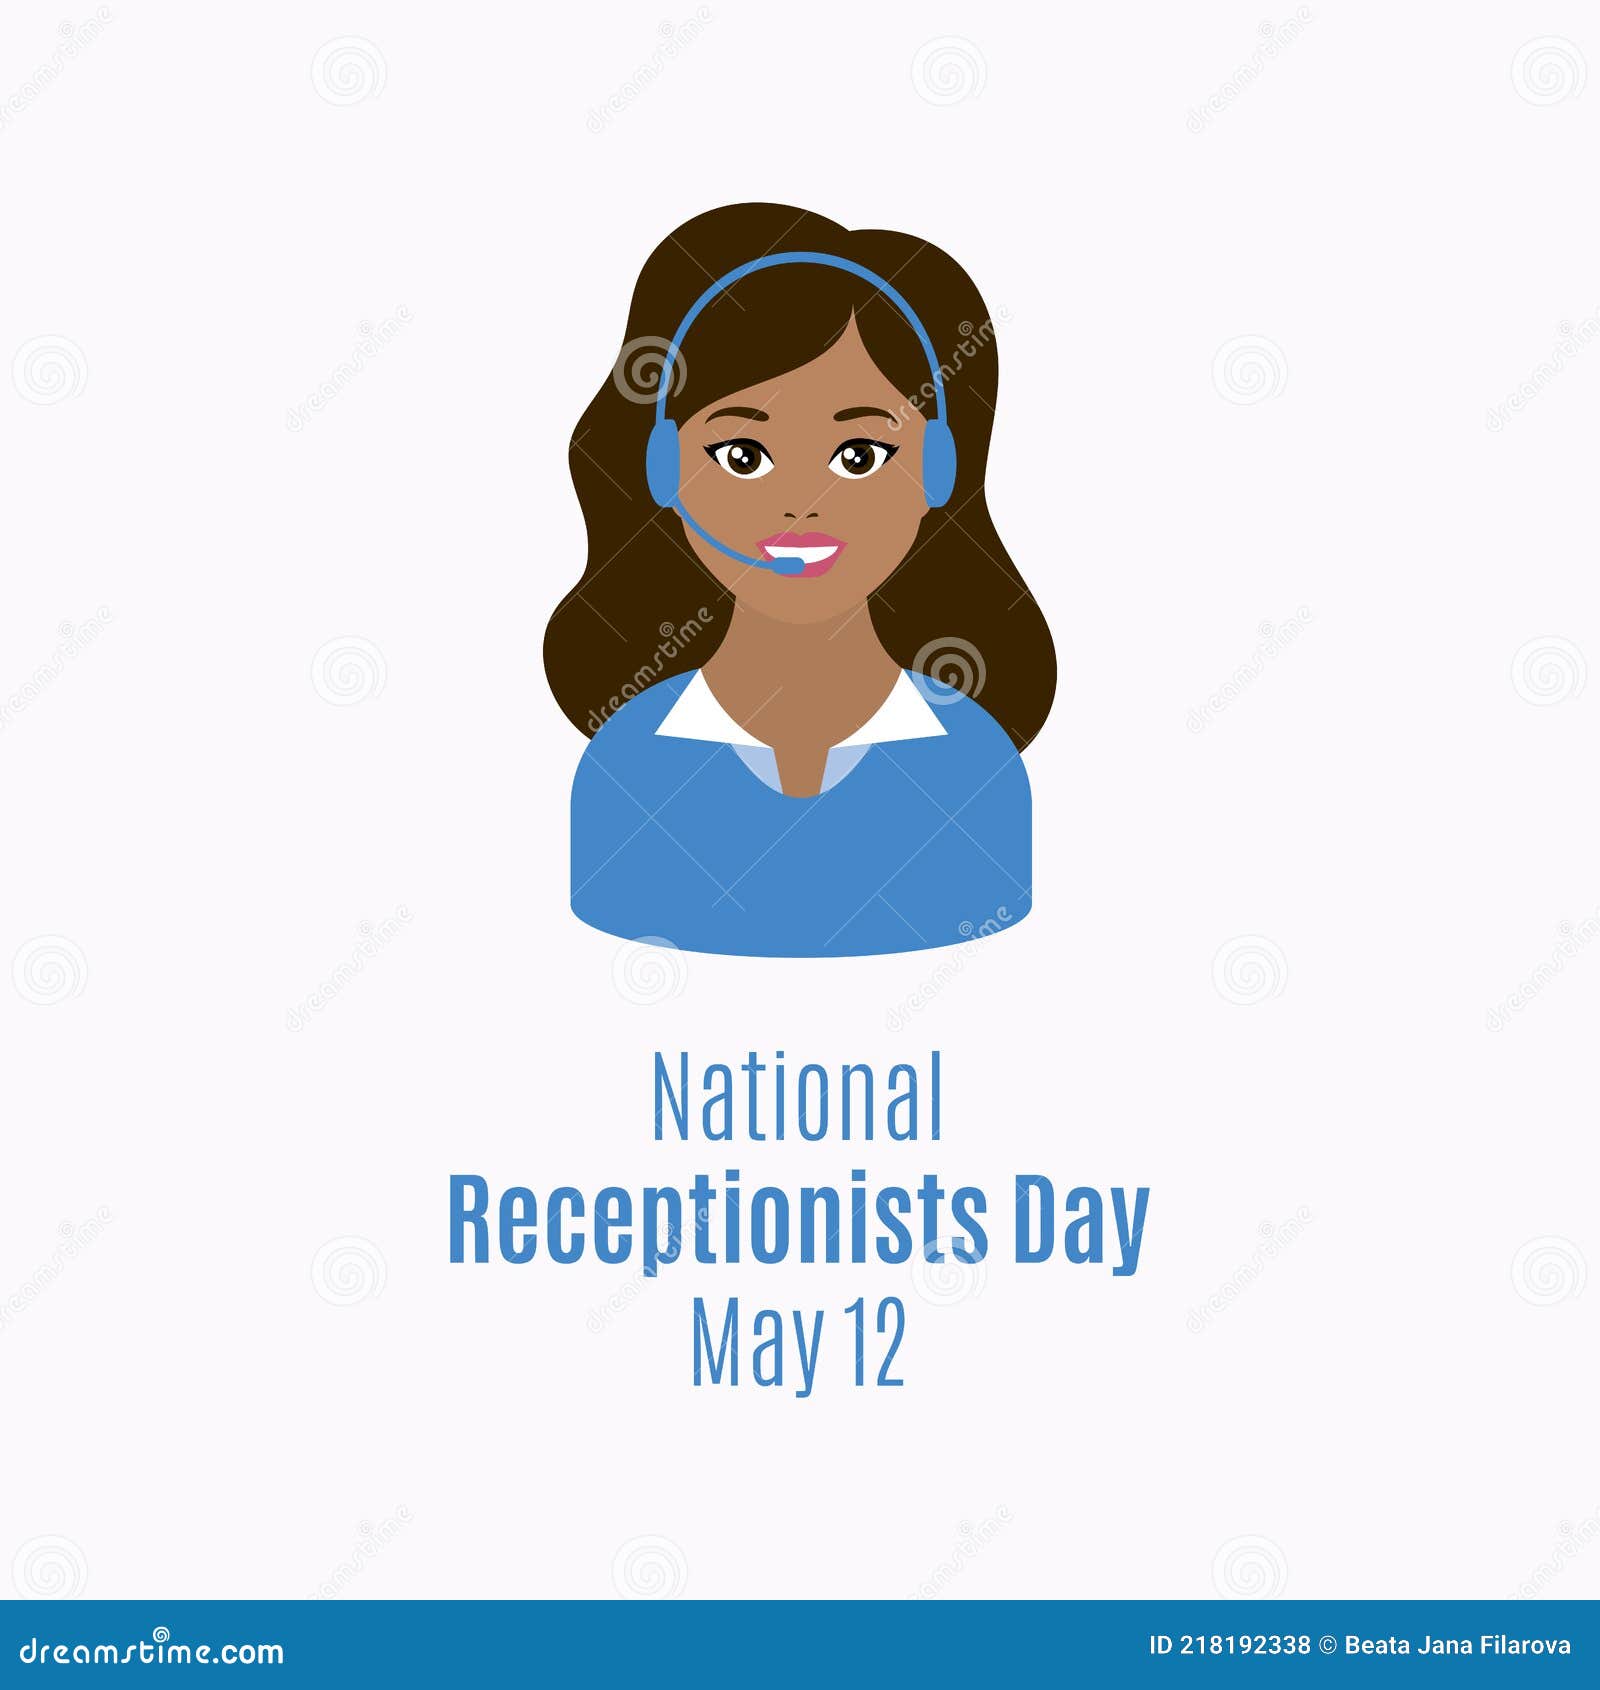 national receptionists day 